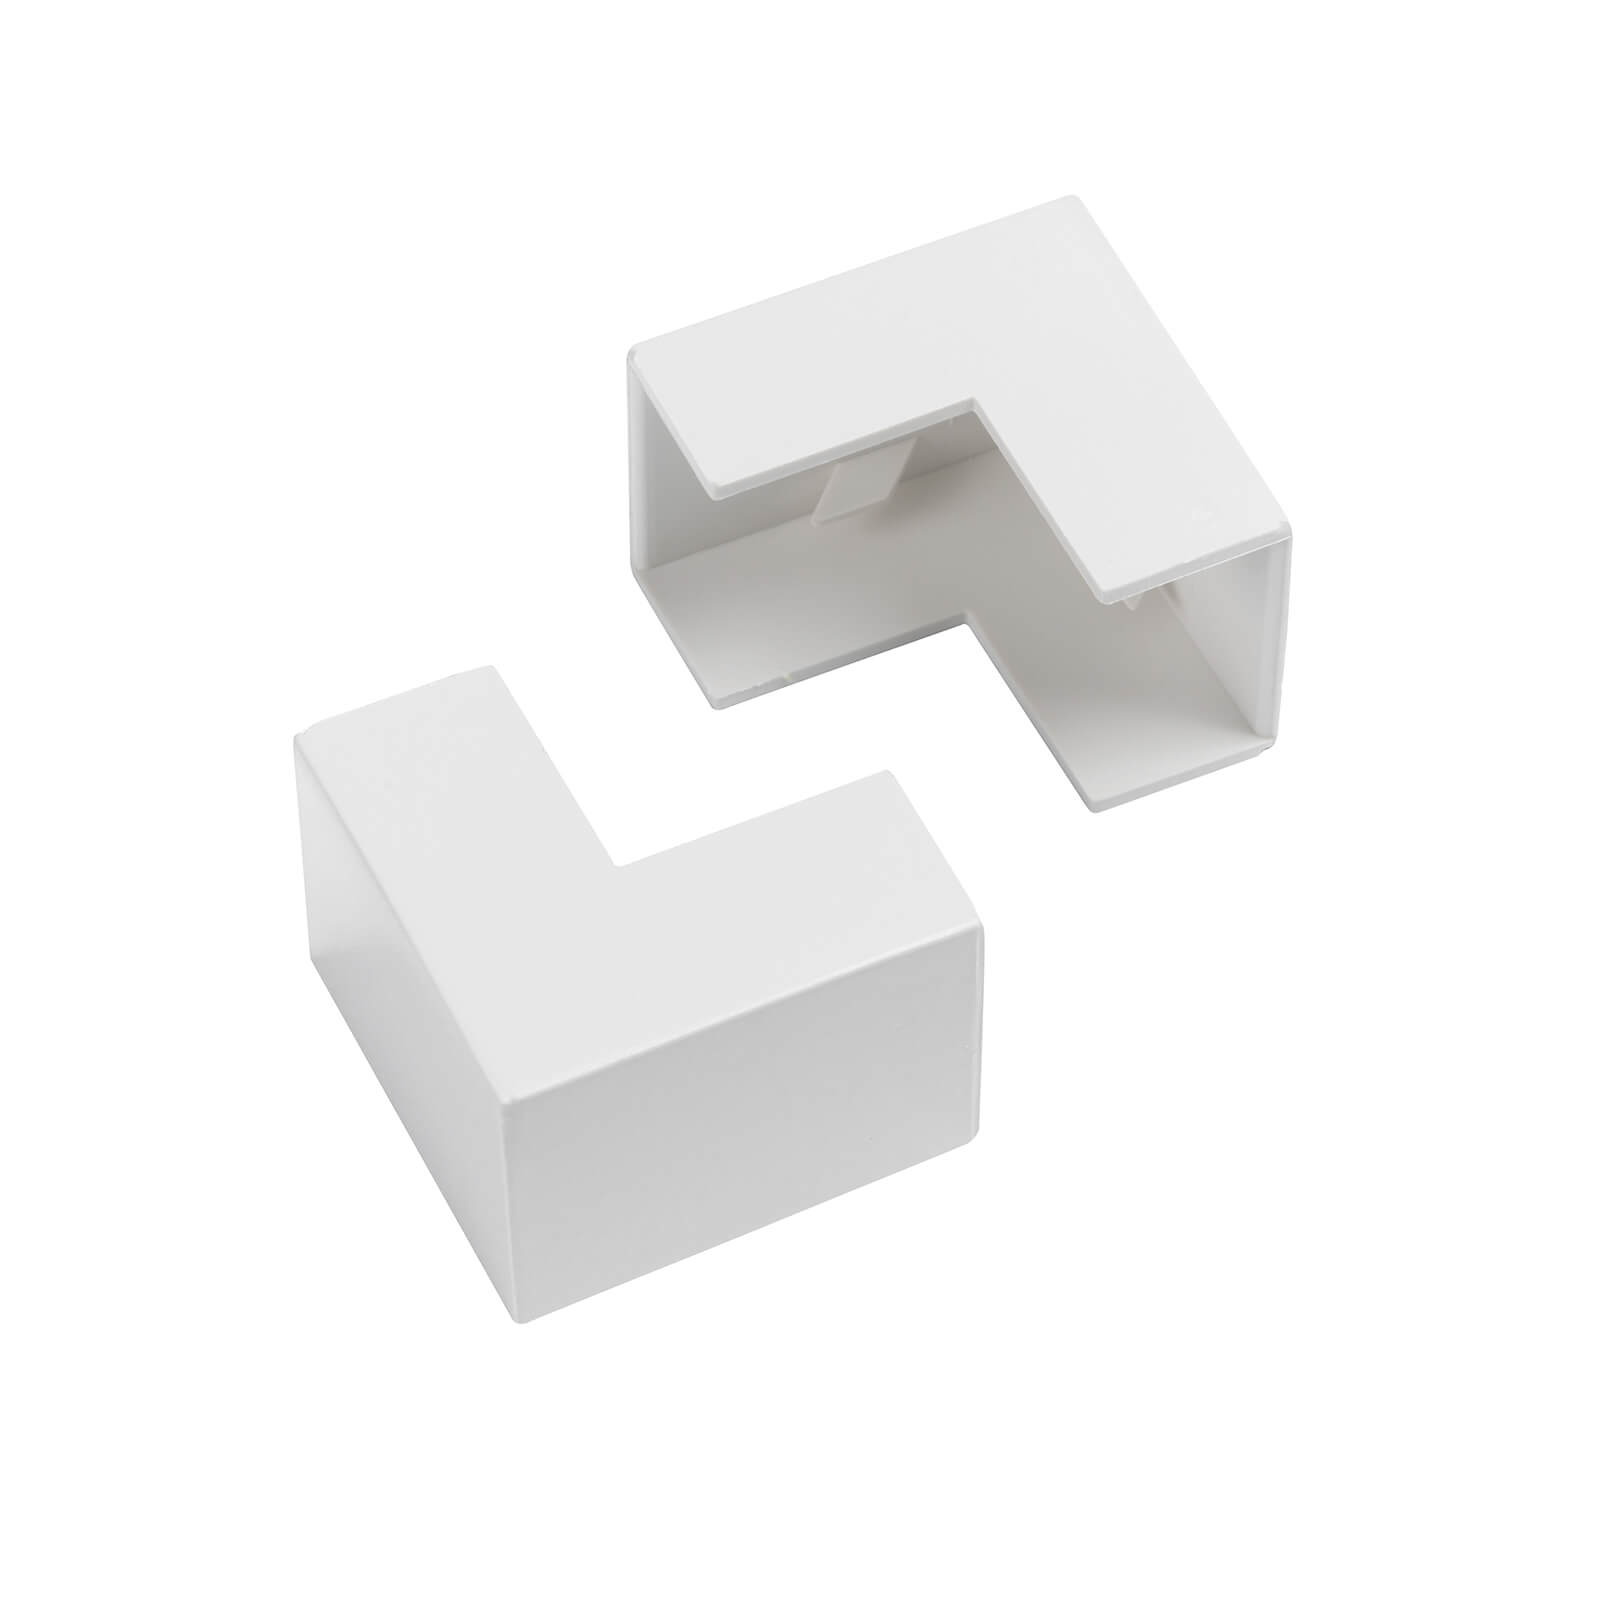 Photo of D-line 25x16mm Trunking Clip-on External Bend 2 Pack - White